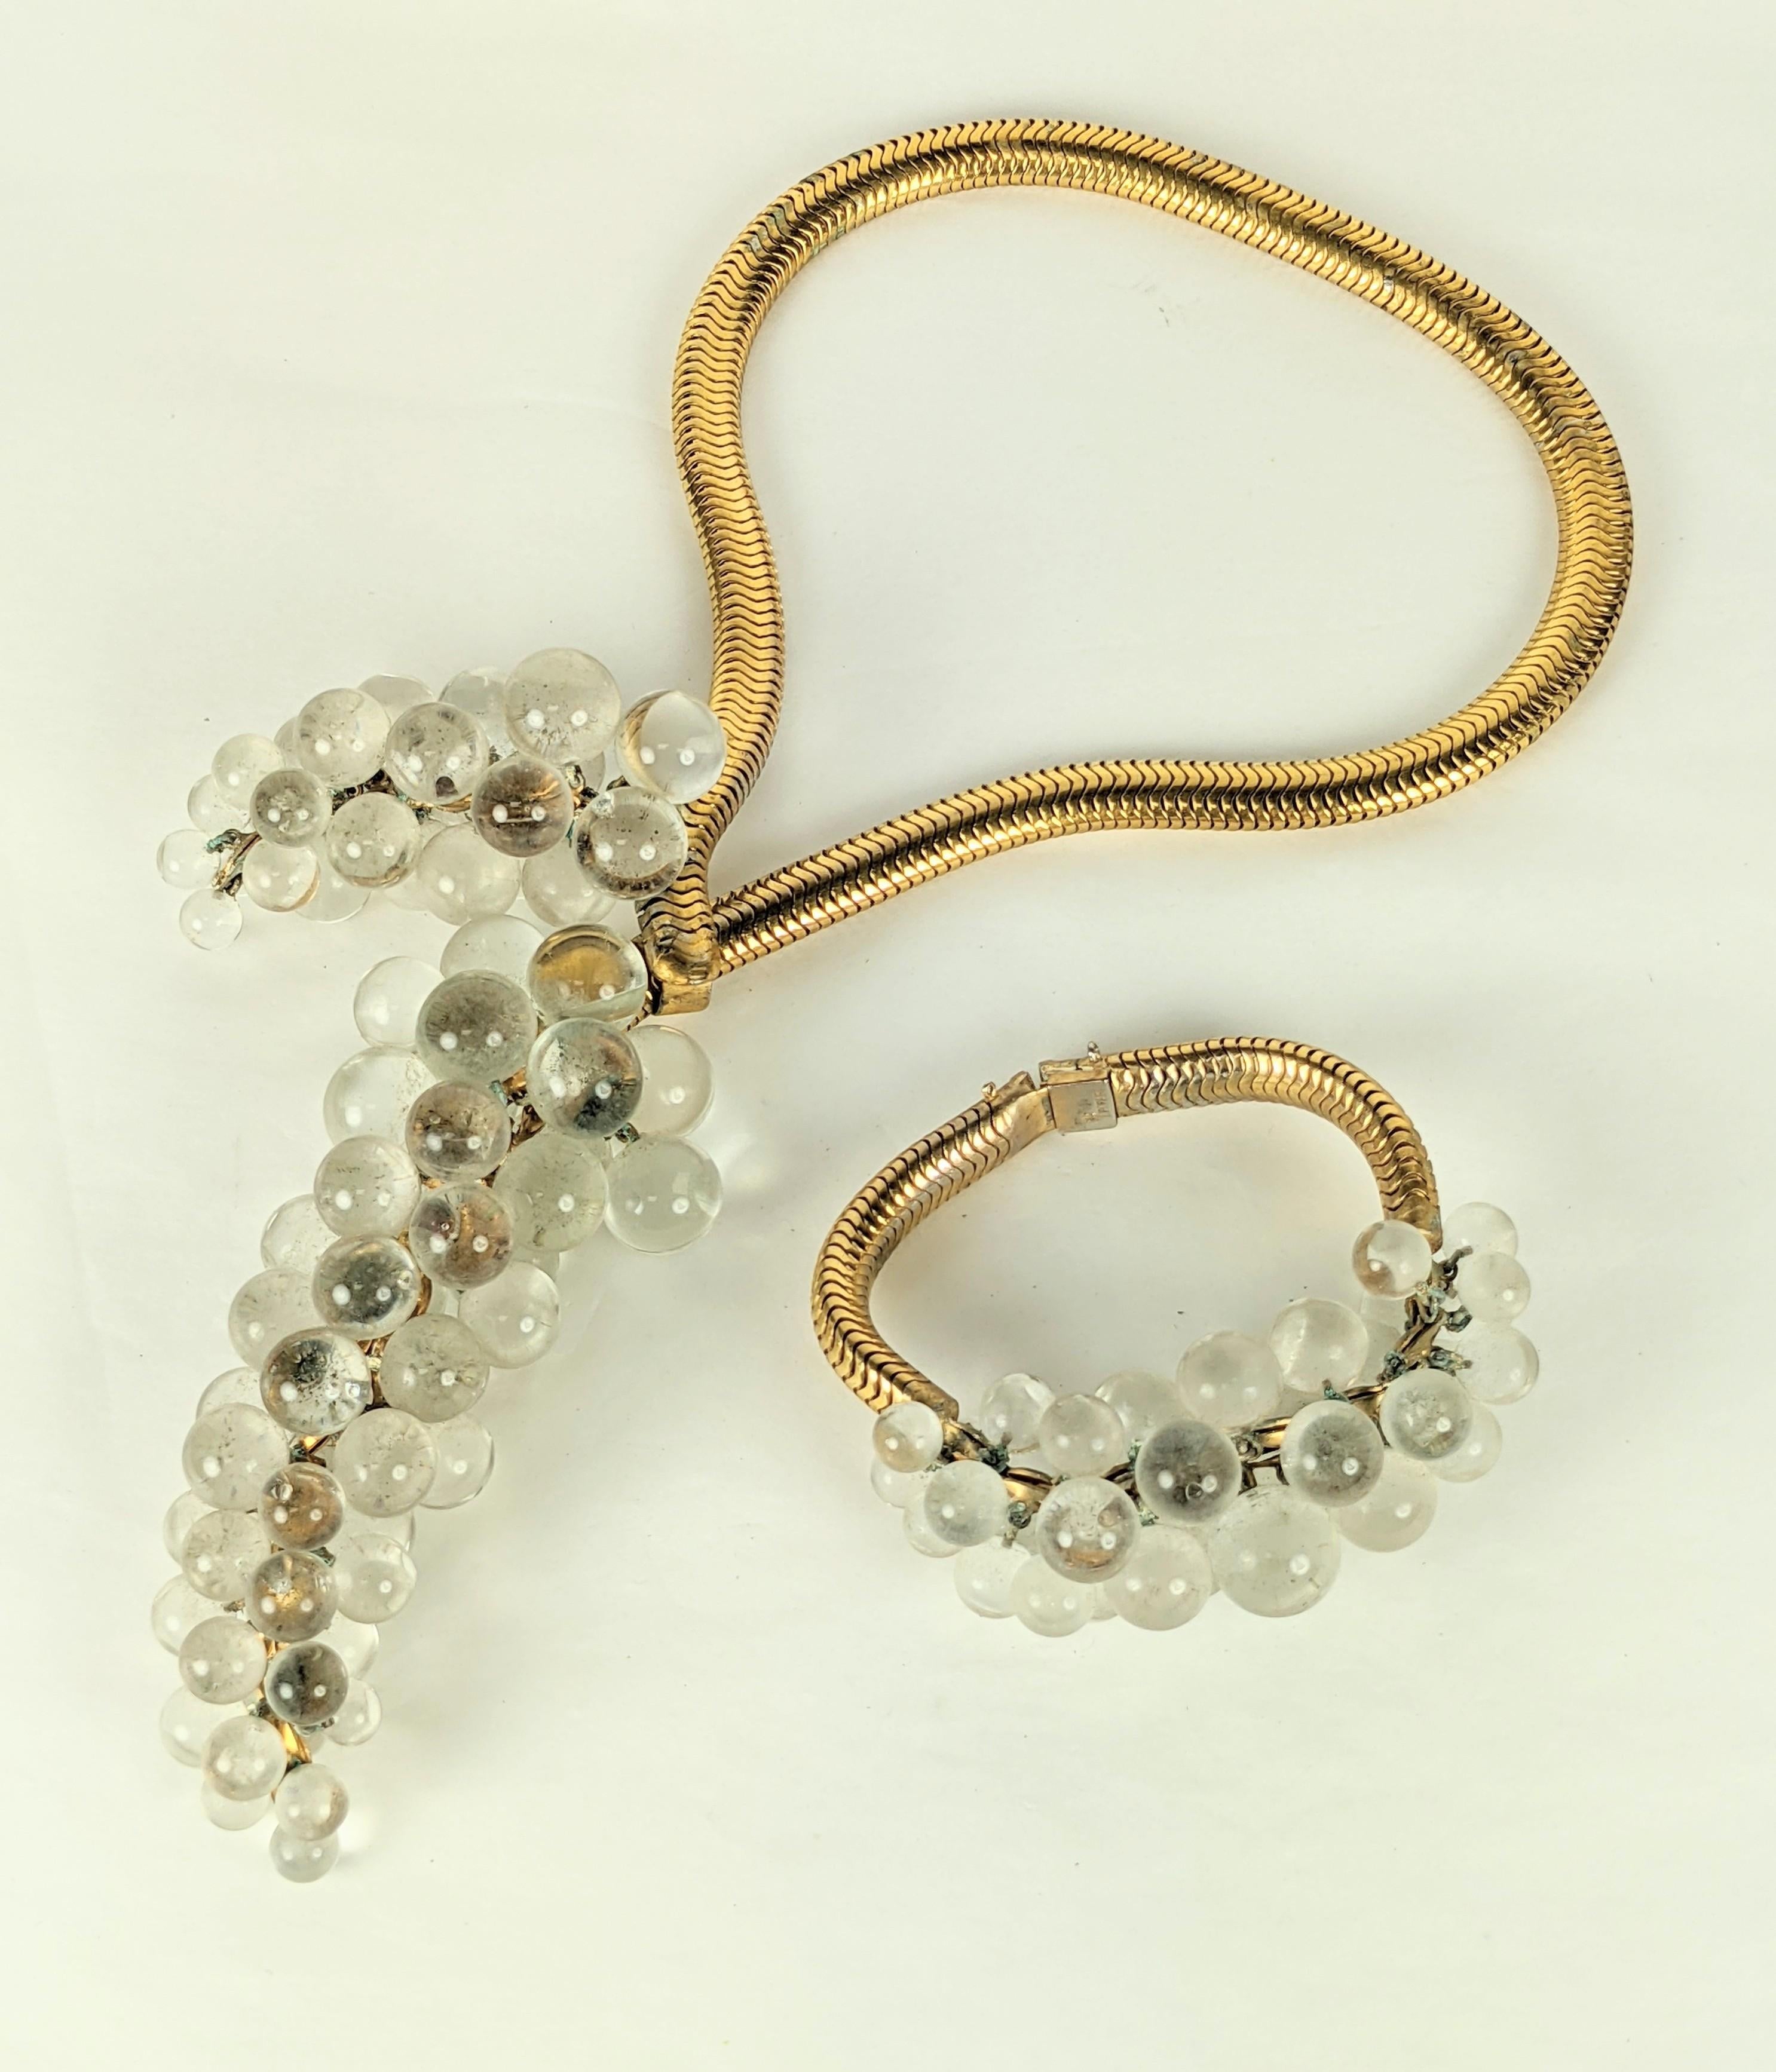 Rare and unusual Trifari Alfred Phillipe Crystal Retro Cluster Necklace and Bracelet from the late 1930's.Suzanne Belperron  inspired. Super rare, and designed with crystal ball grape like clusters on a gilt snake chain. A hook closes the necklace